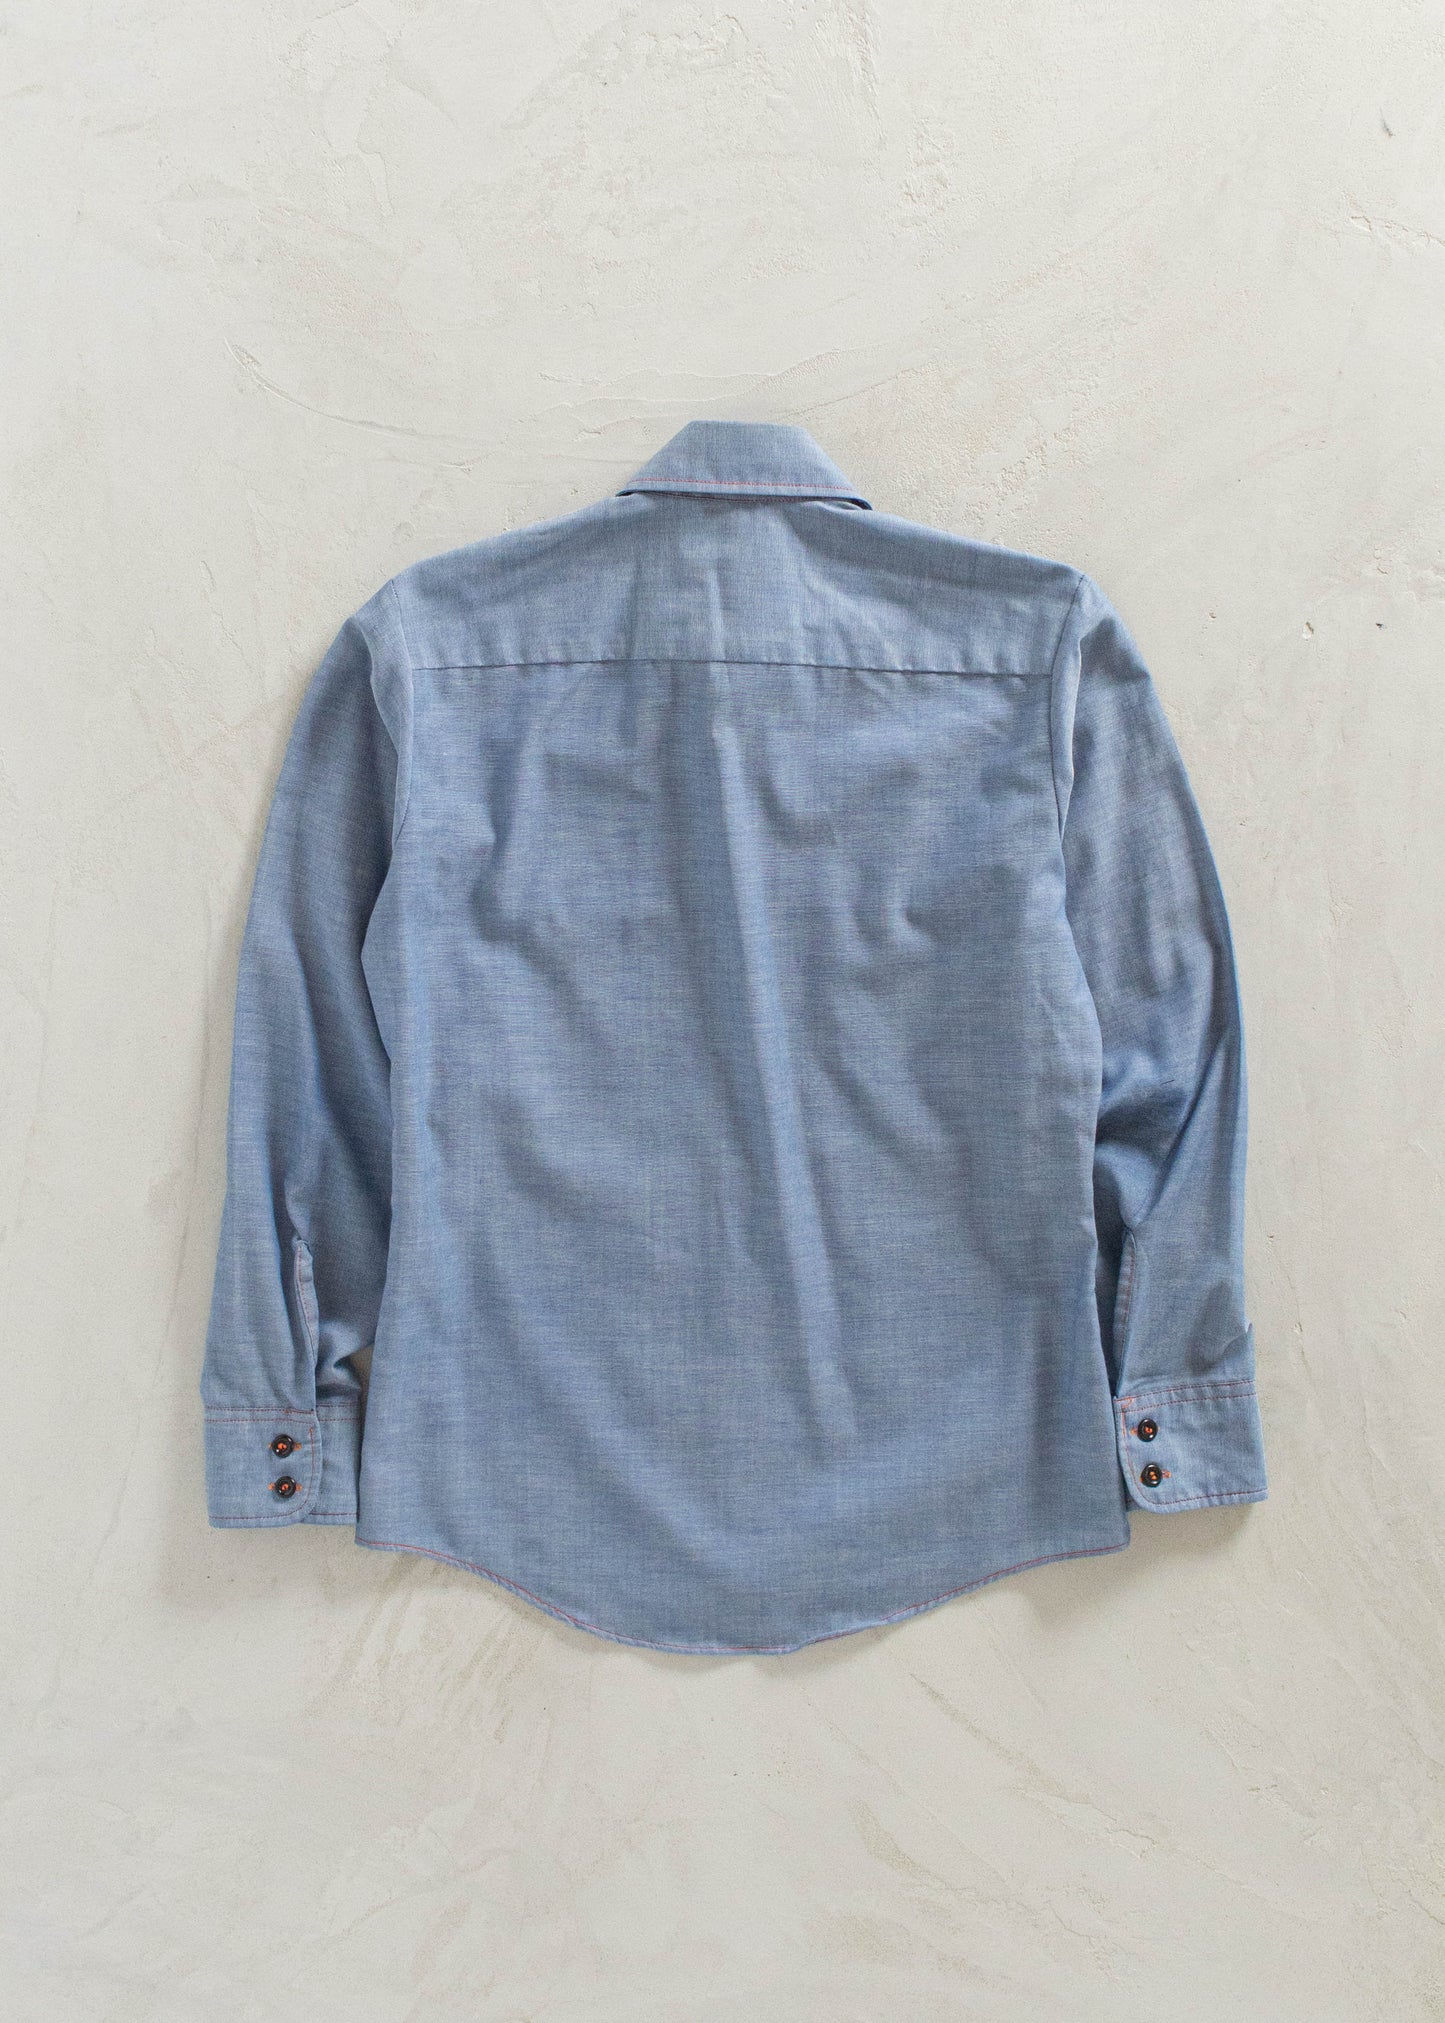 Vintage 1980s Montgomery Ward Long Sleeve Chambray Button Up Shirt Size 2XS/XS